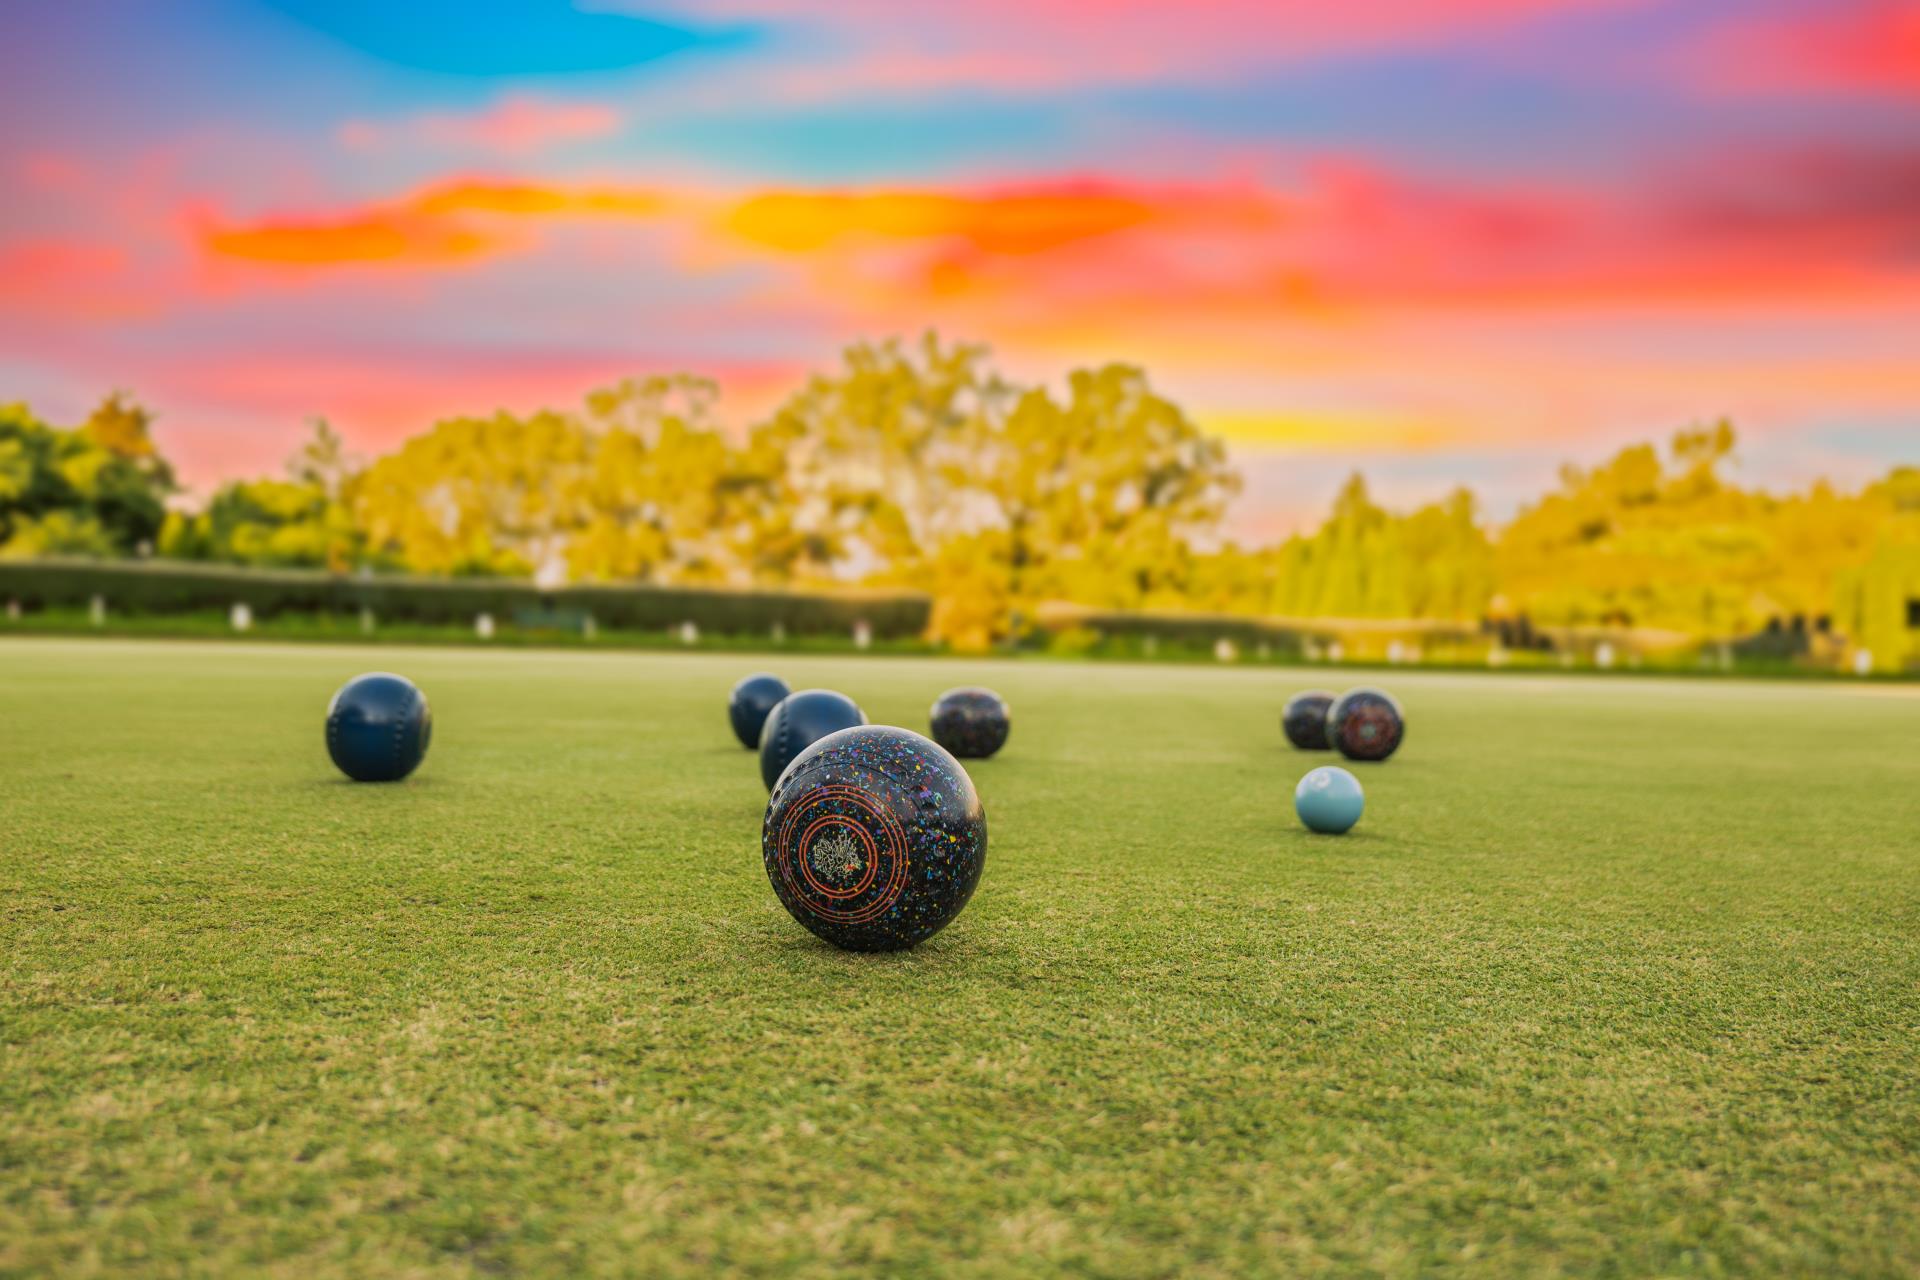 Community invited to bowl for Men’s Health Week